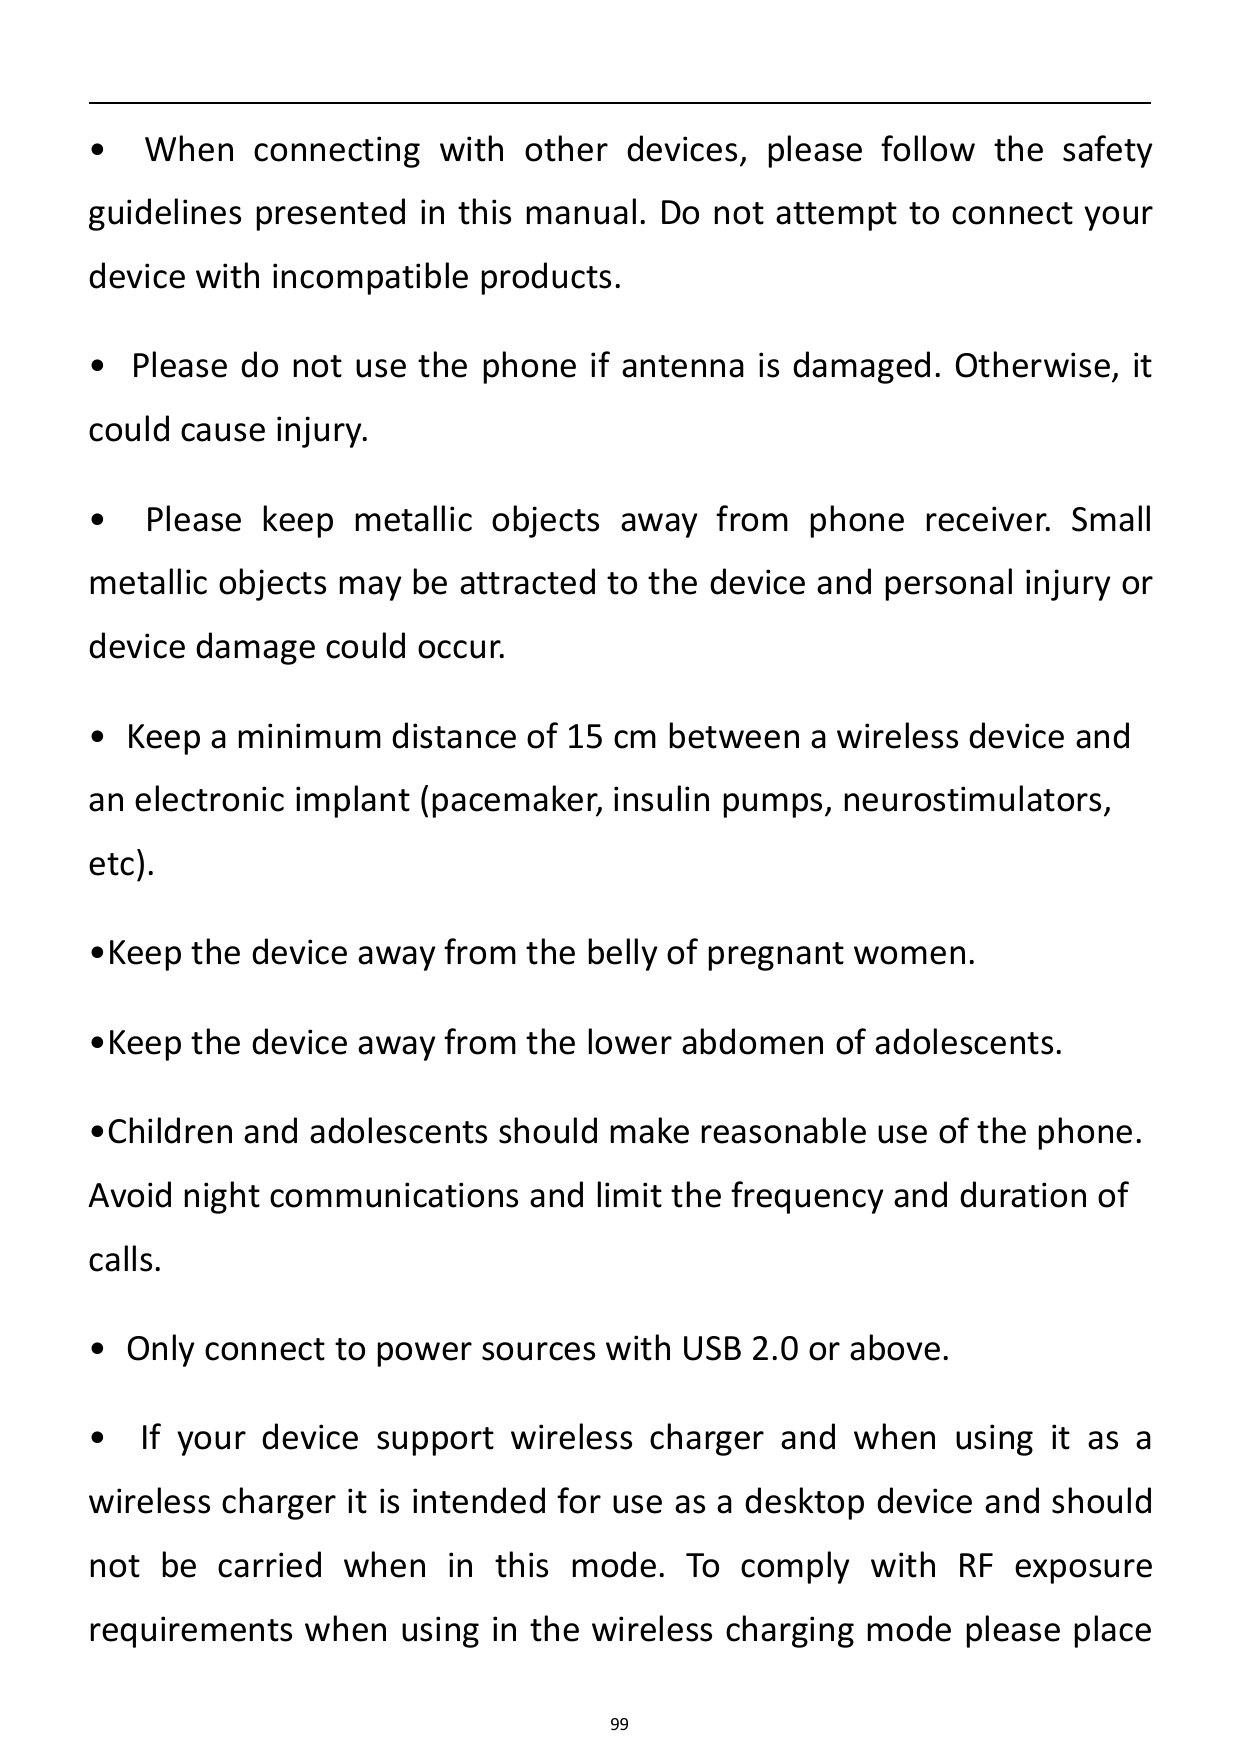 • When connecting with other devices, please follow the safetyguidelines presented in this manual. Do not attempt to connect you